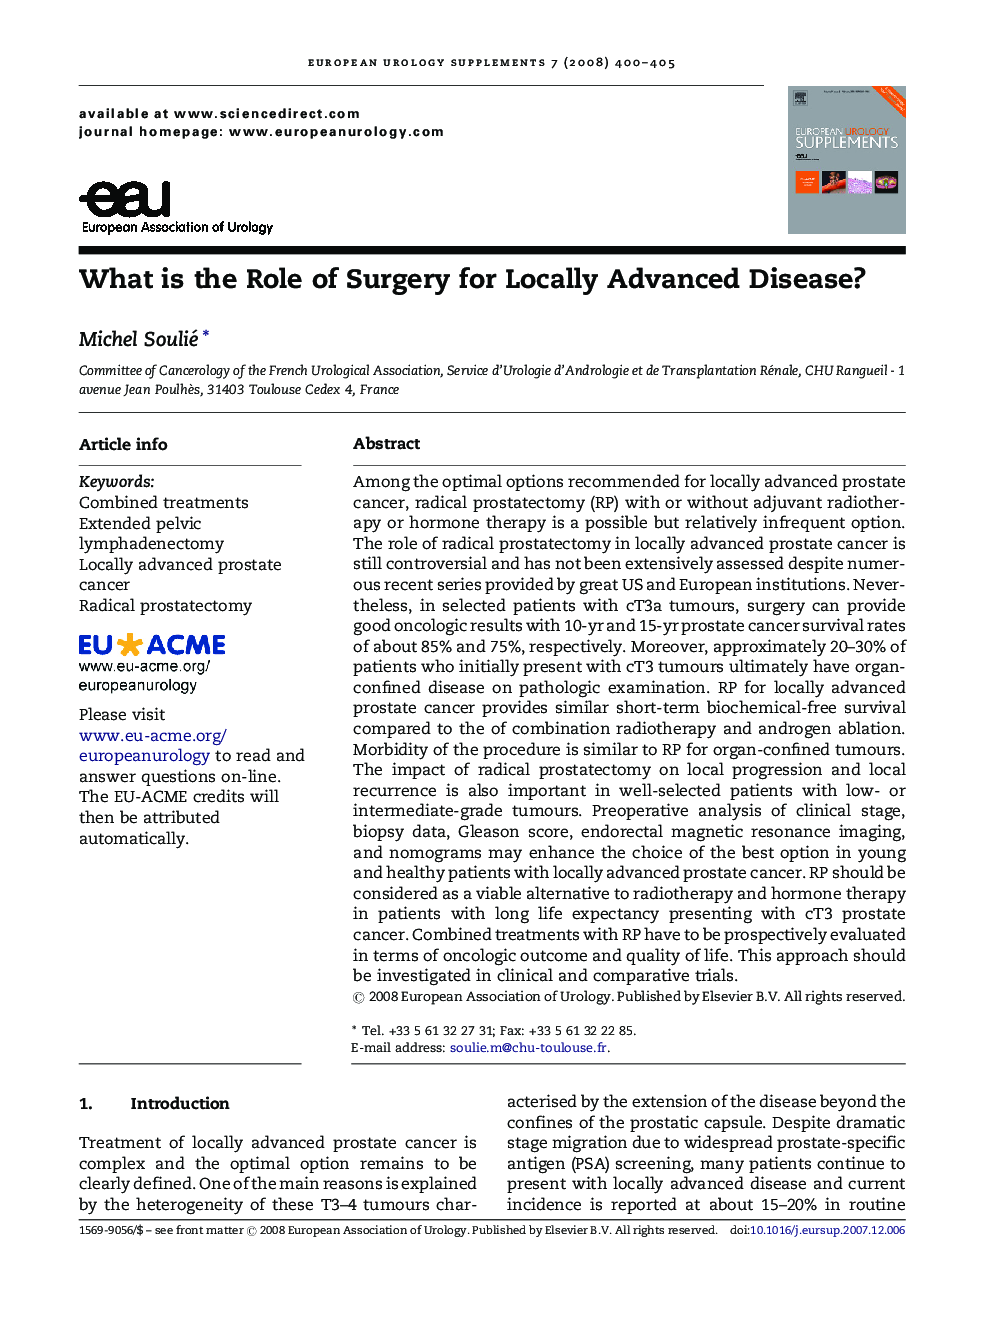 What is the Role of Surgery for Locally Advanced Disease? 